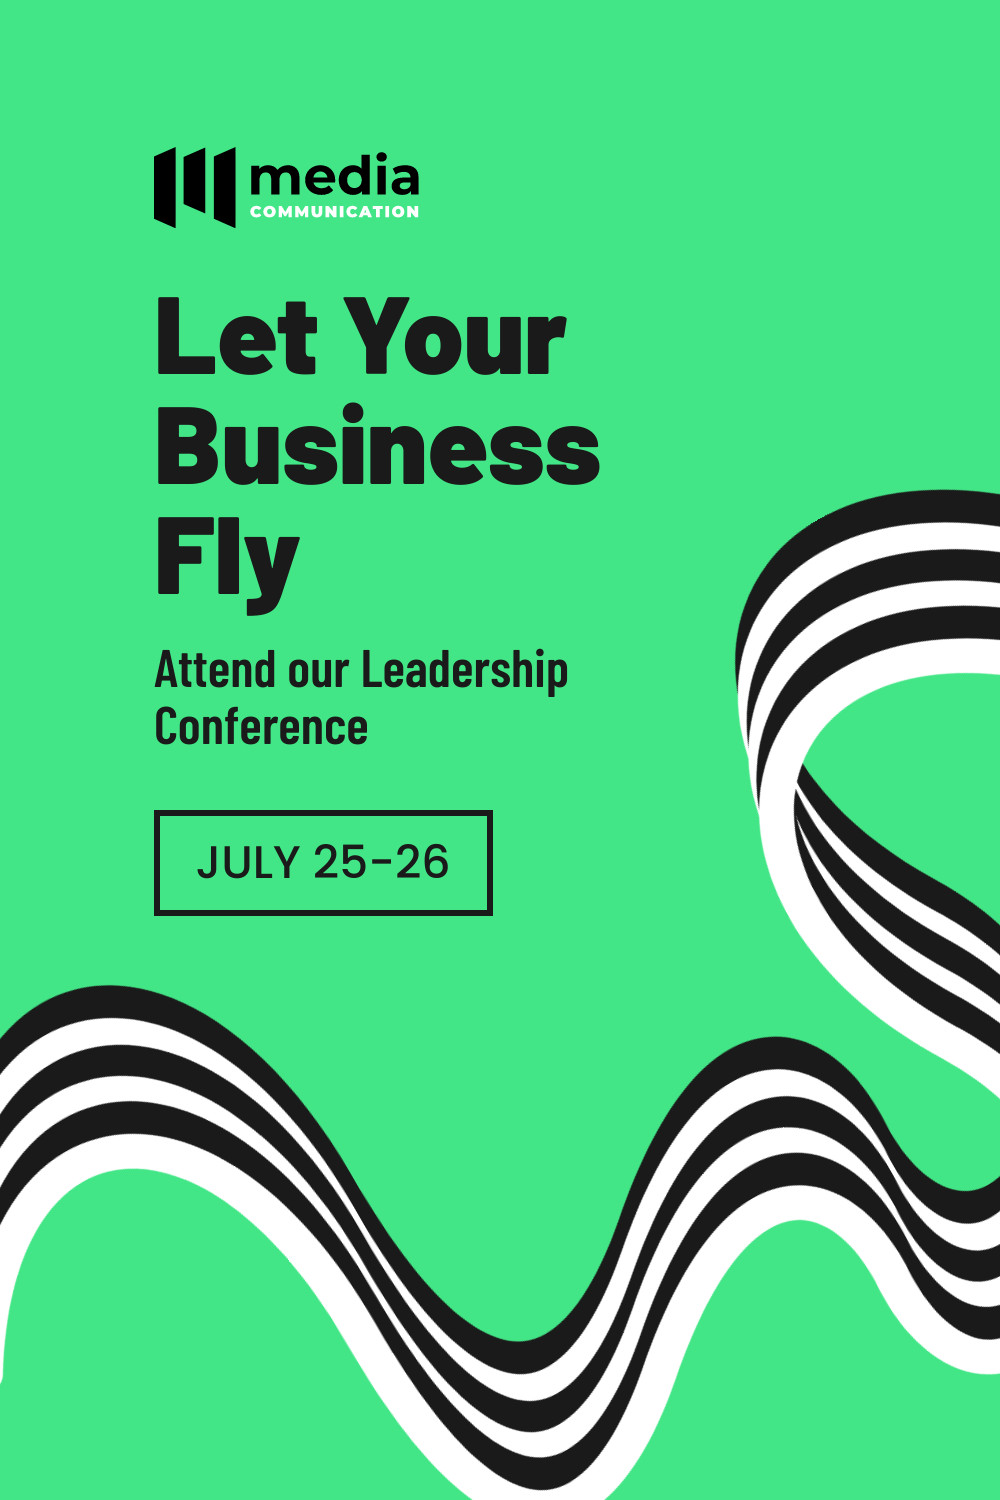 Let Your Business Fly Leadership Conference